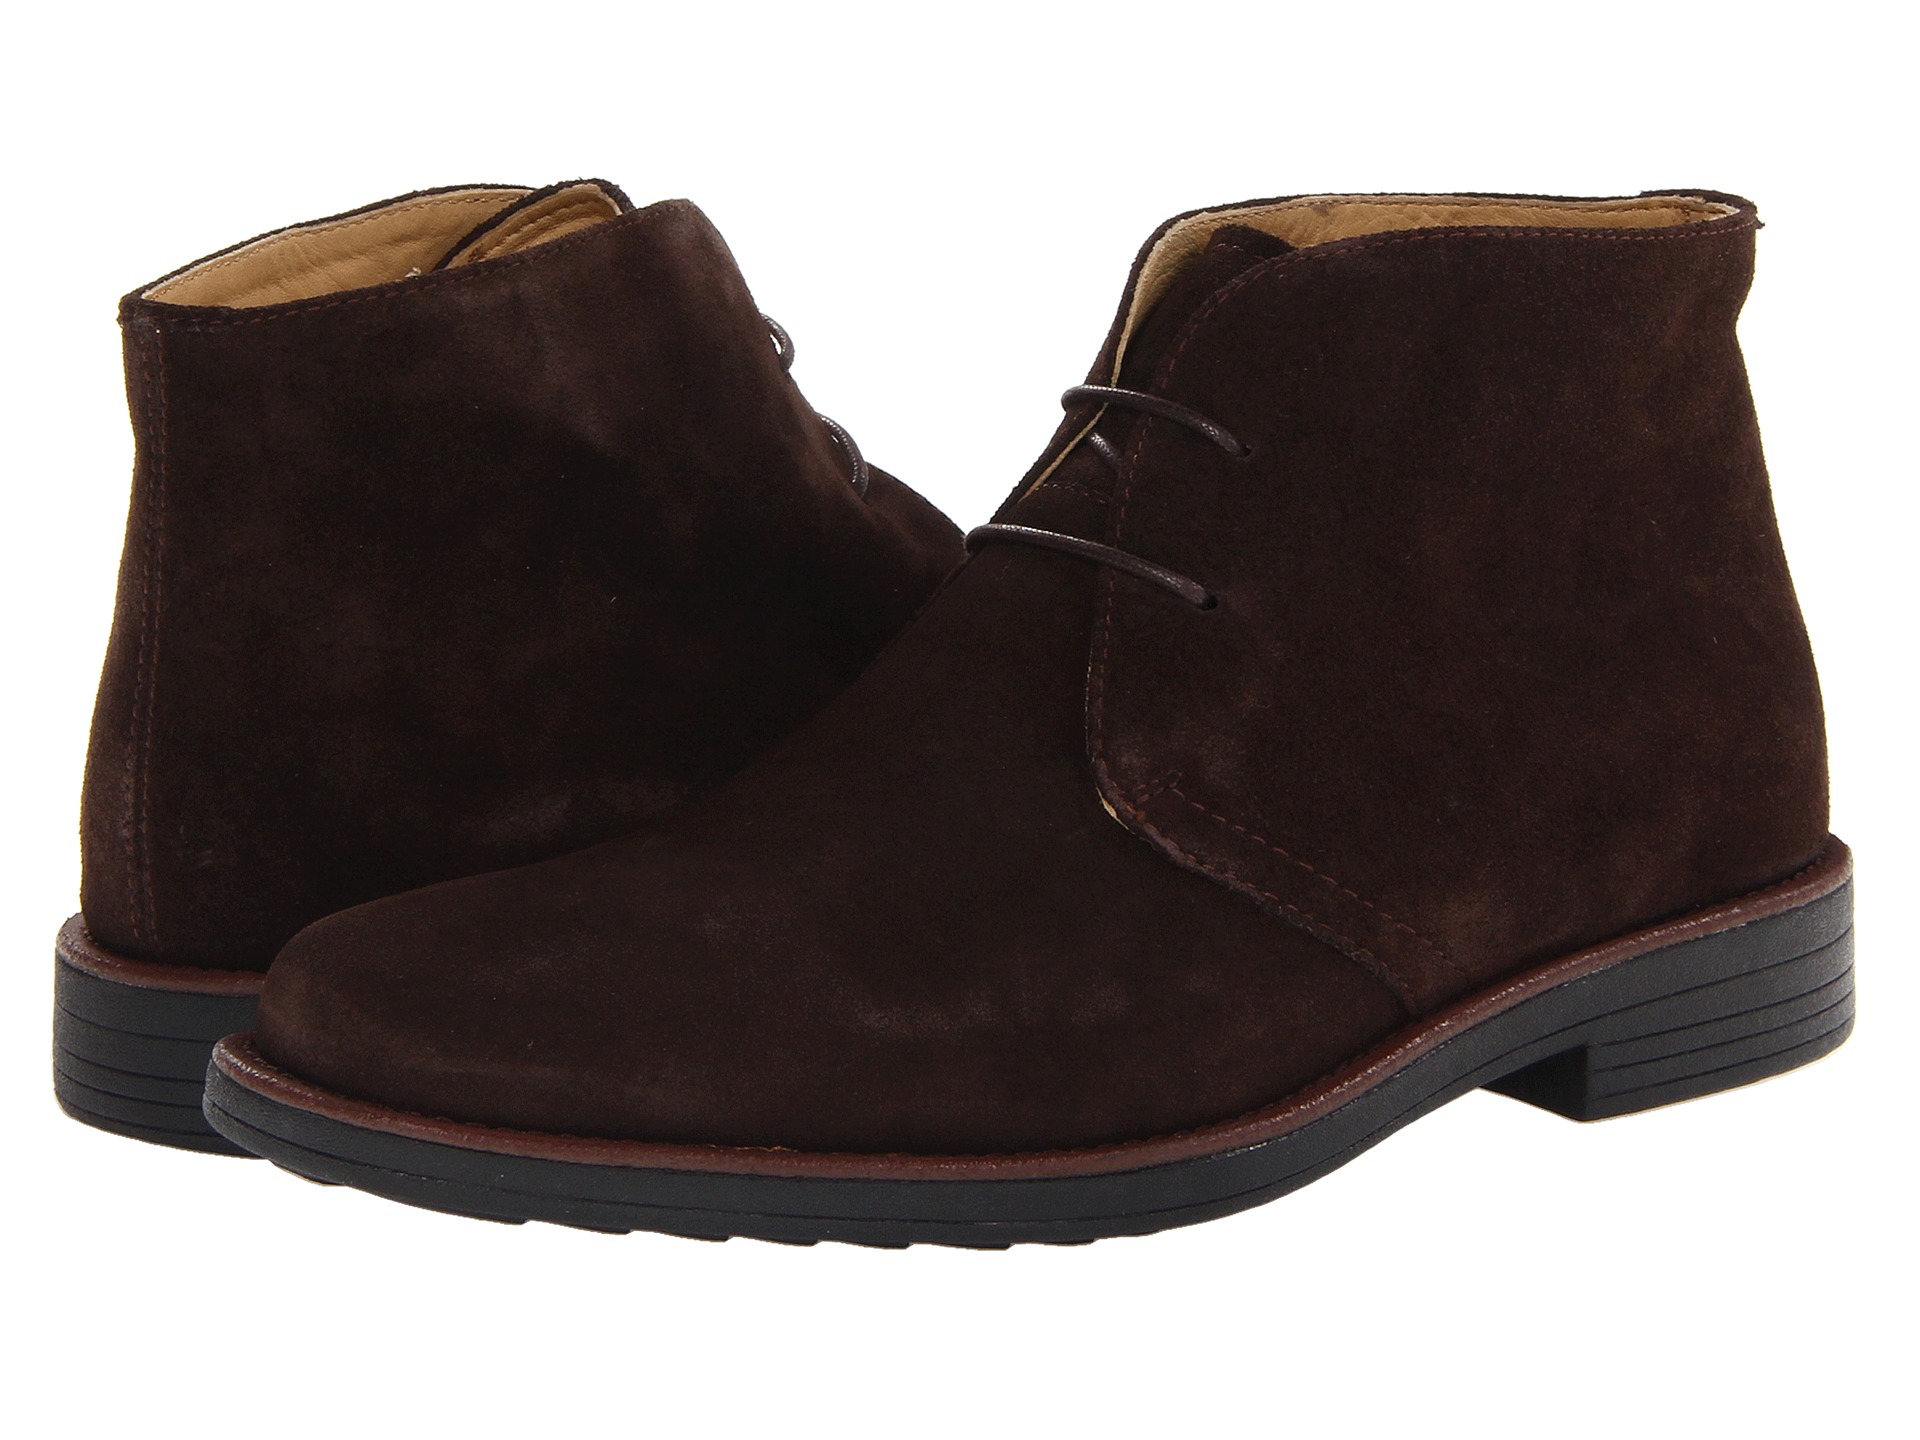 Steptronic Lace Up Chukka Boot Chocolate Suede